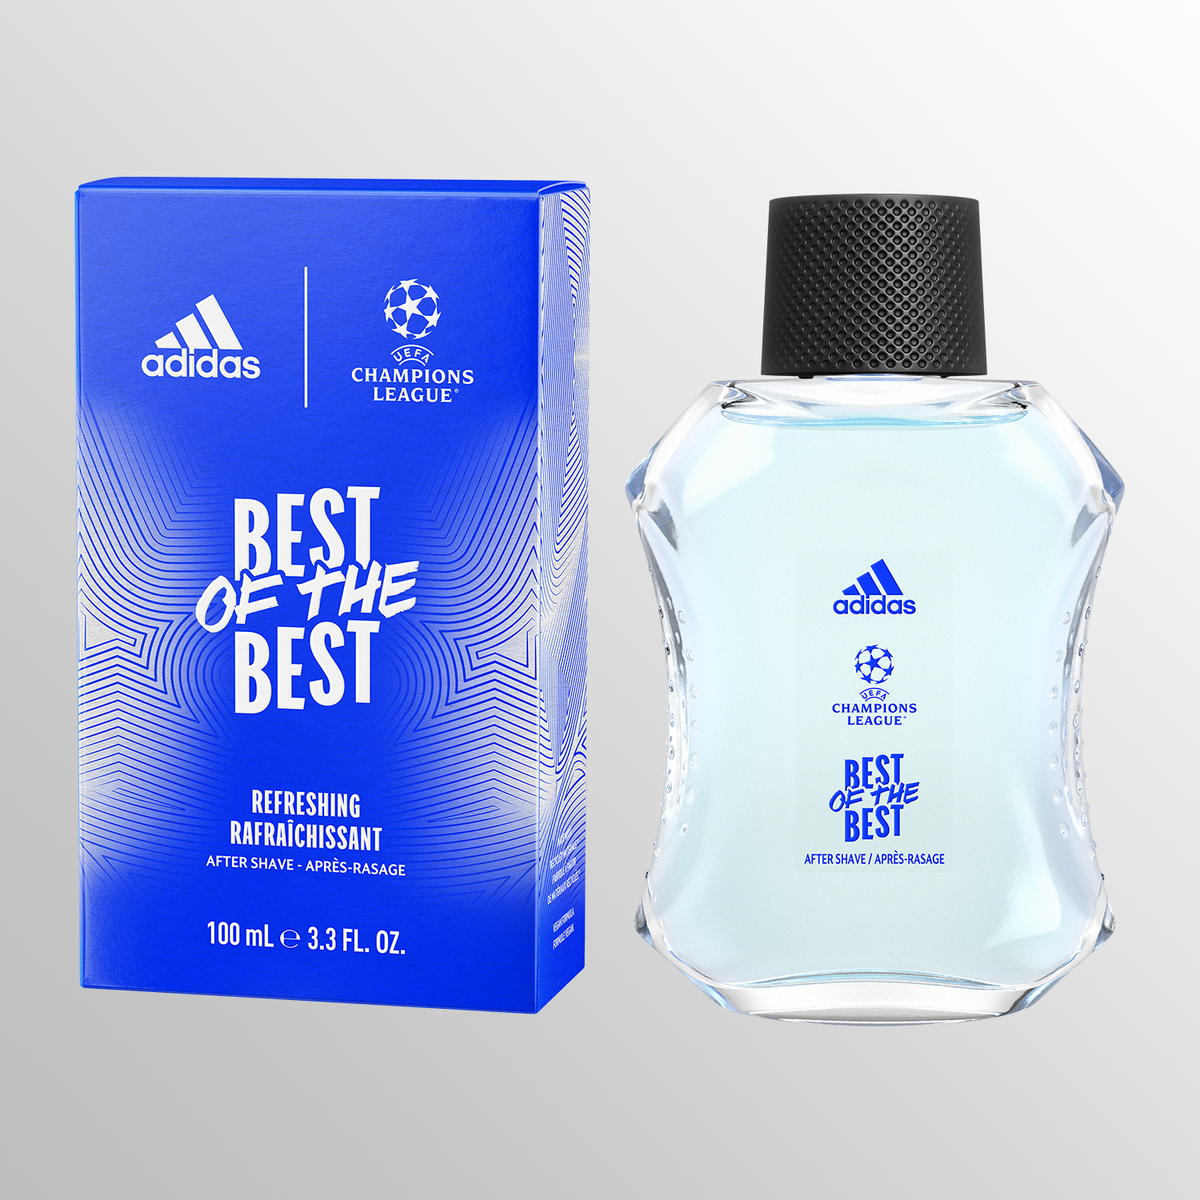 Adidas UEFA Best of the Best After Shave 100 ml